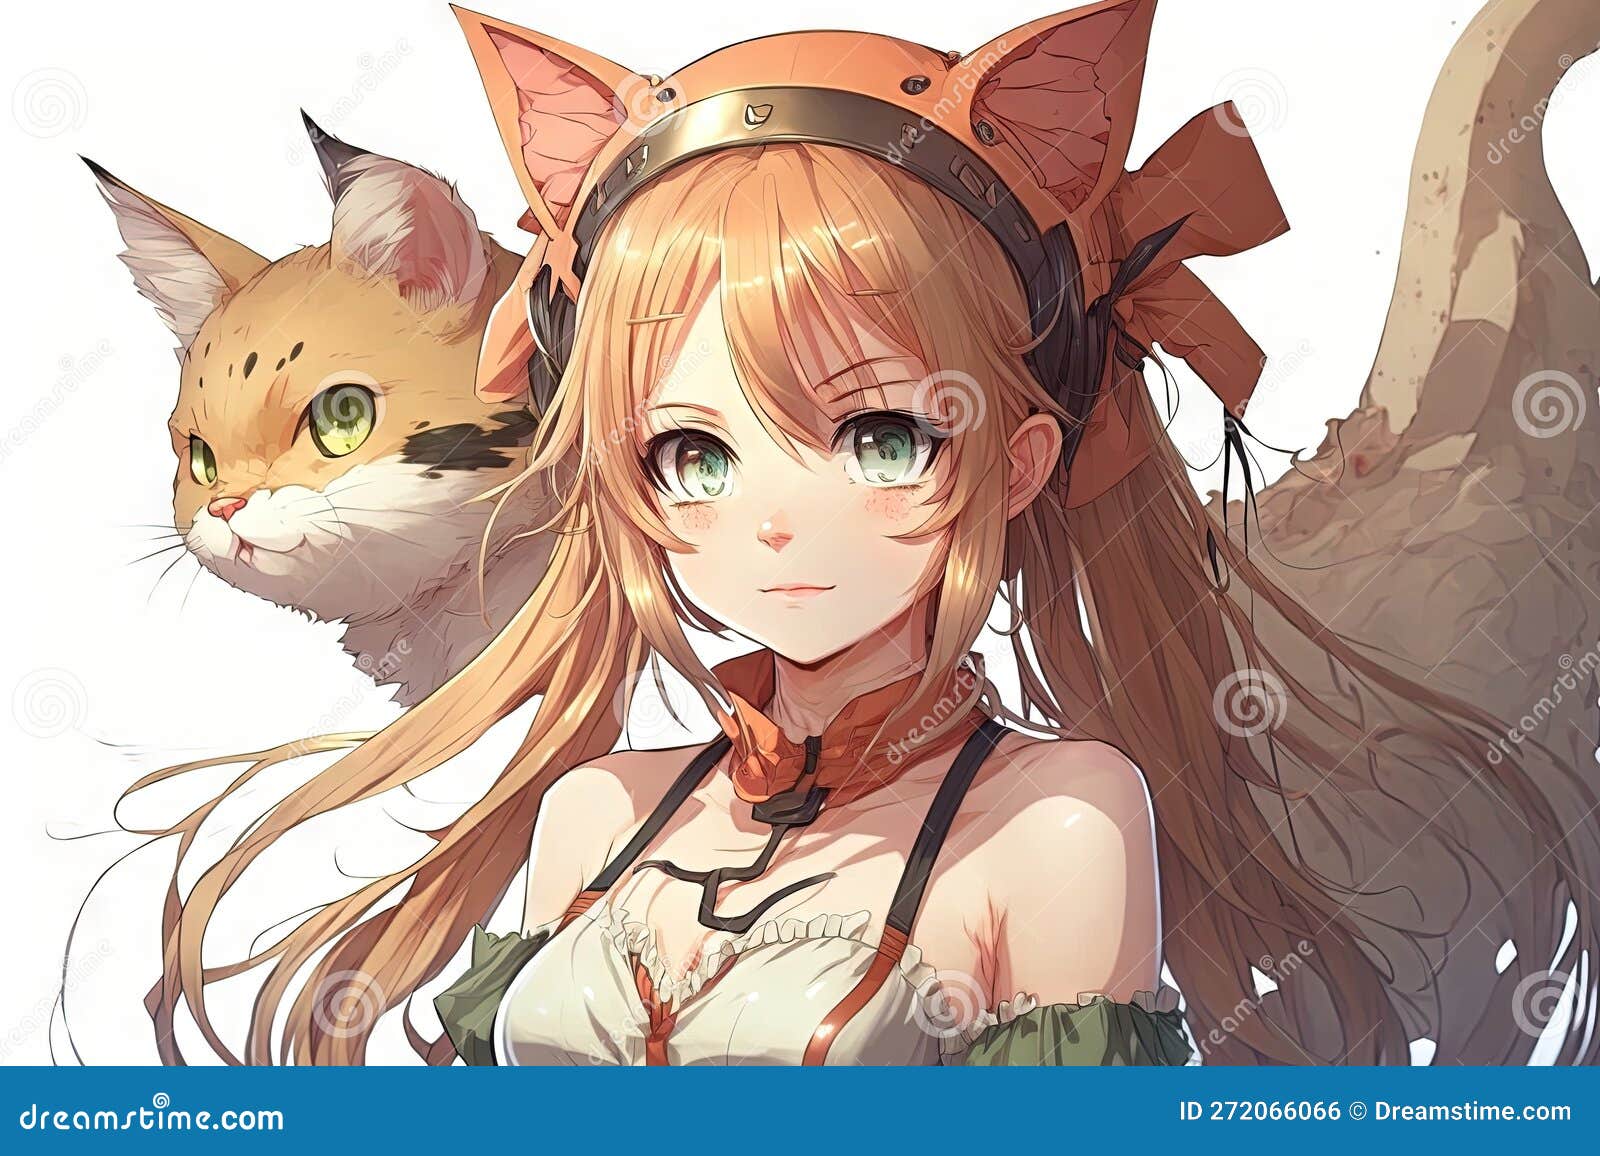 Anime Girl with Cat Ears - 512x512 anime pfp cute style - Image Chest -  Free Image Hosting And Sharing Made Easy